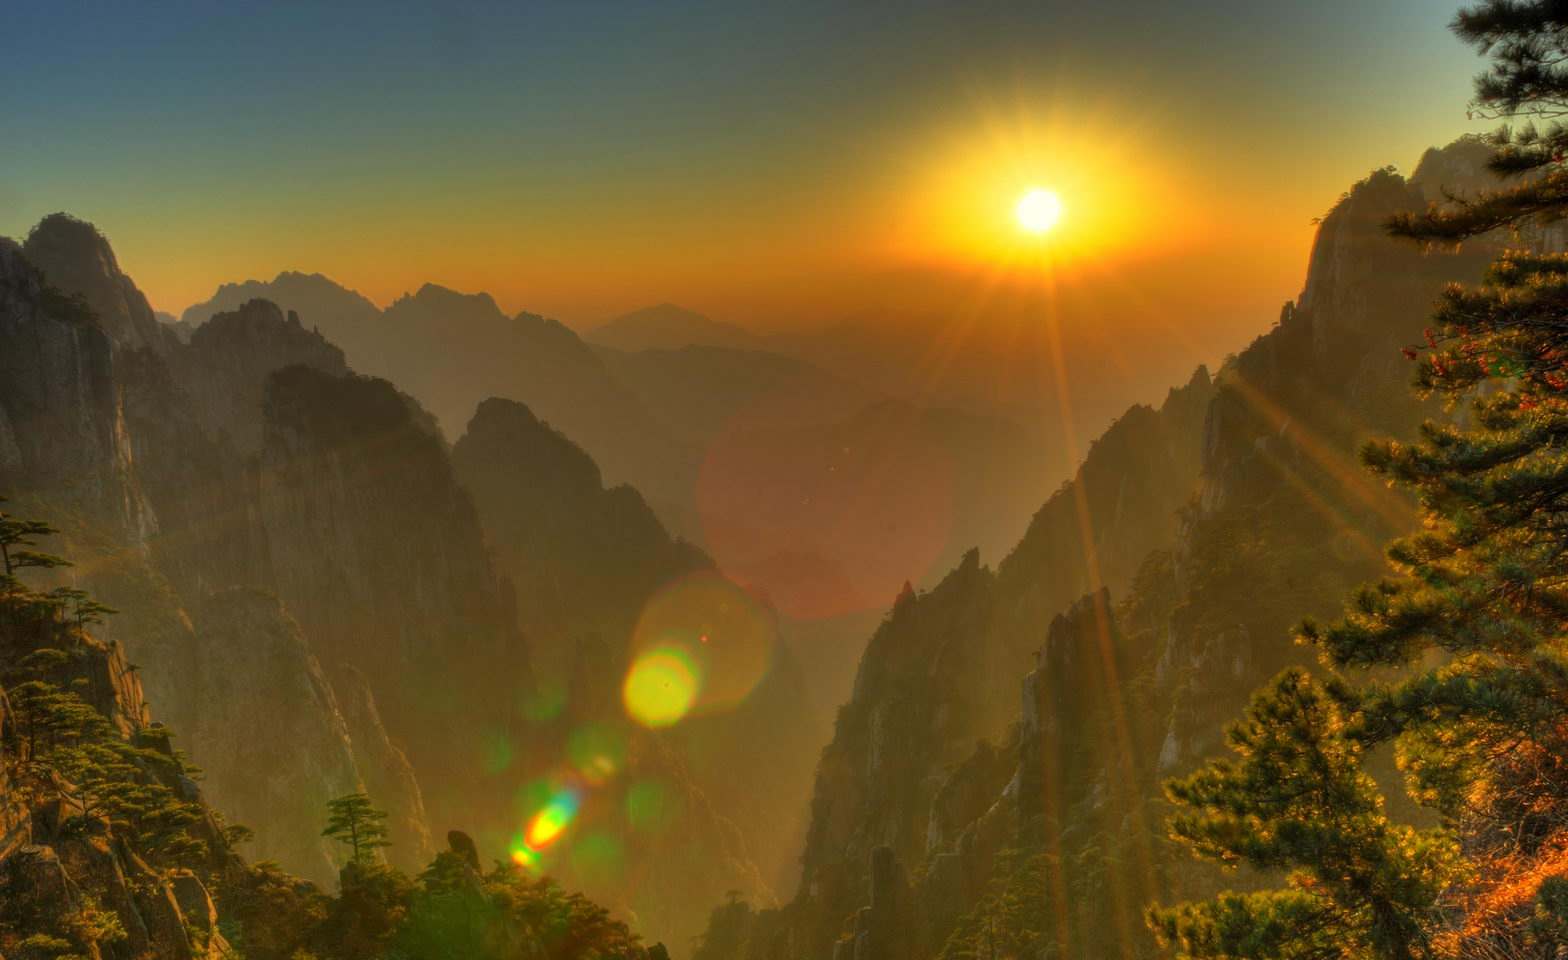 3-Day Beijing Huangshan Sightseeing Tour with Round-trip High-speed Train